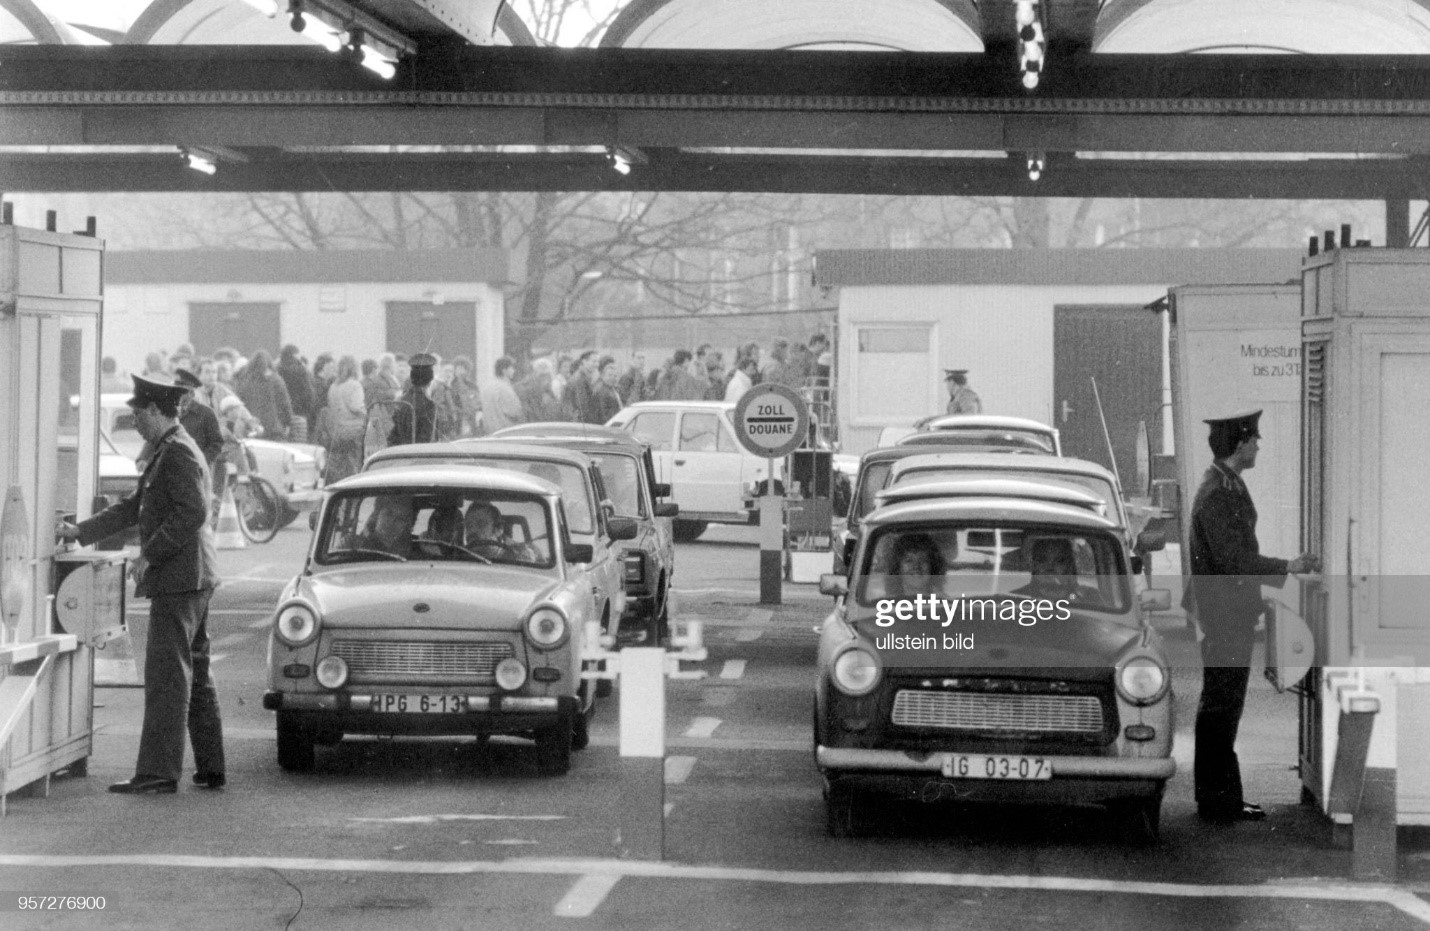 Long queues of pedestrians (in the background) and rows of drivers with Trabant cars who are waiting in a disciplined manner at the Bornholmerbrücke border crossing for clearance by the GDR border authorities, photographed on November 10th, 1989.